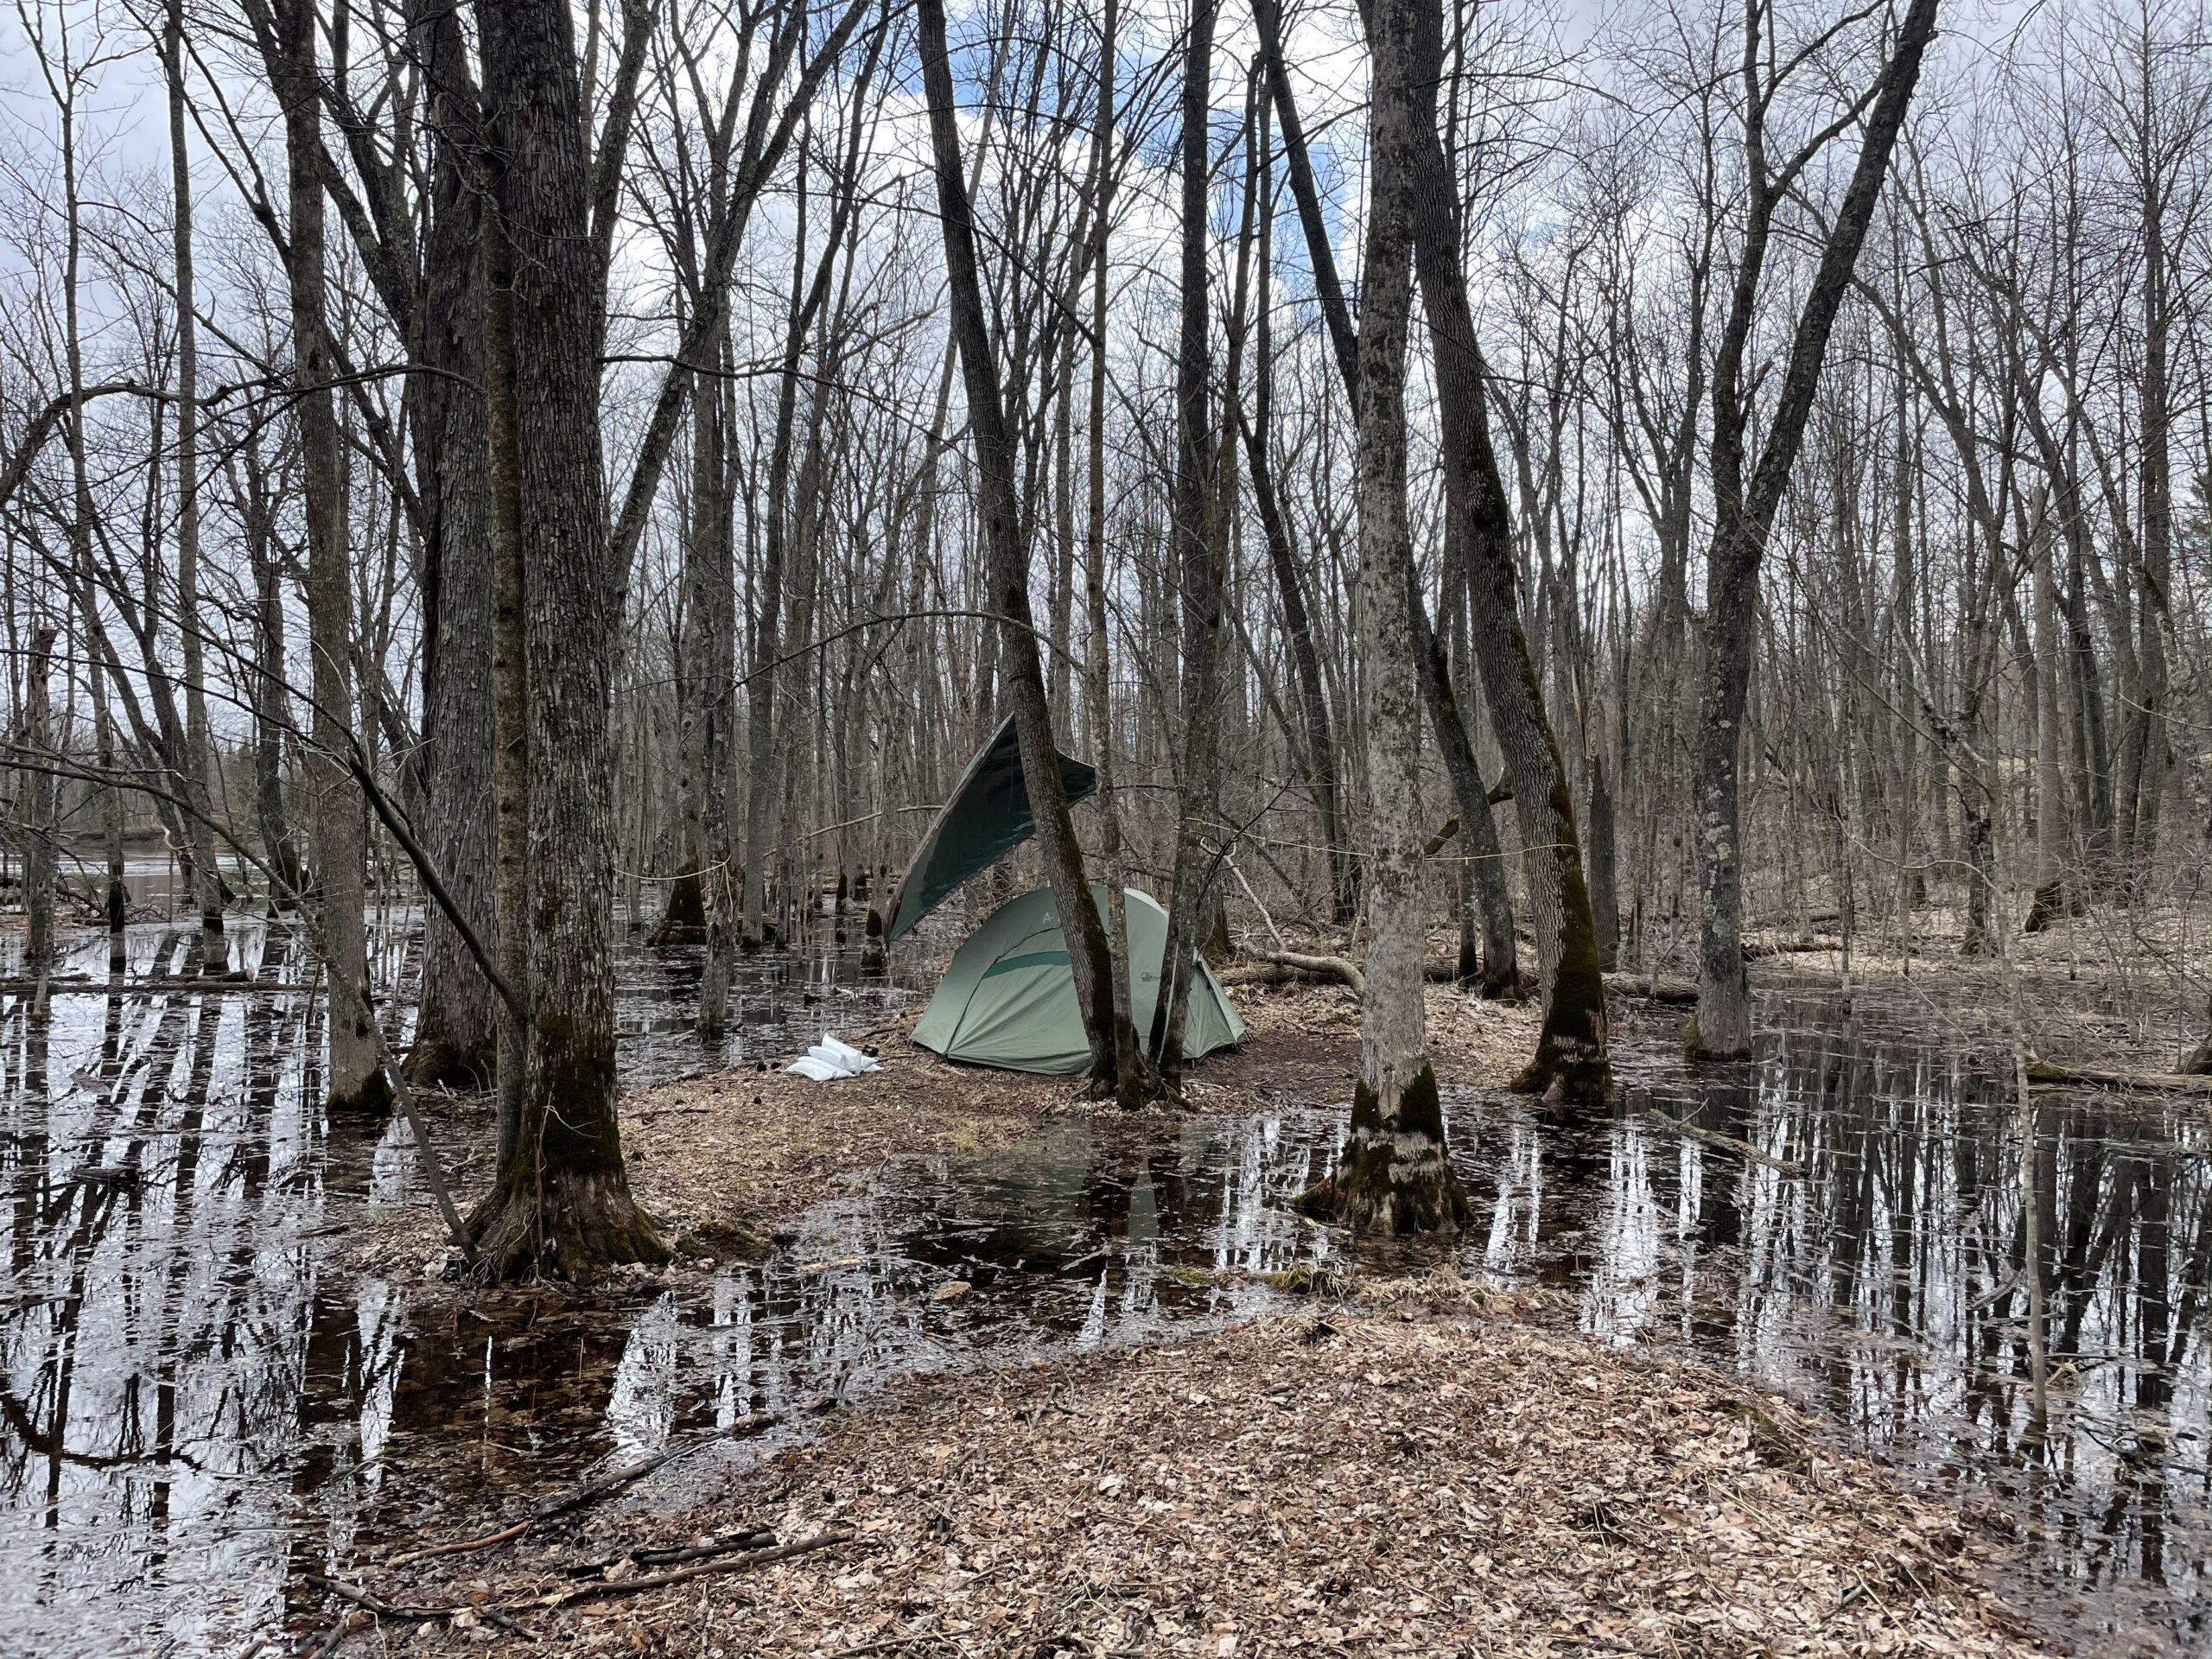 Green tent pitched on small island in muddy riverbed, with brown leafless trees.